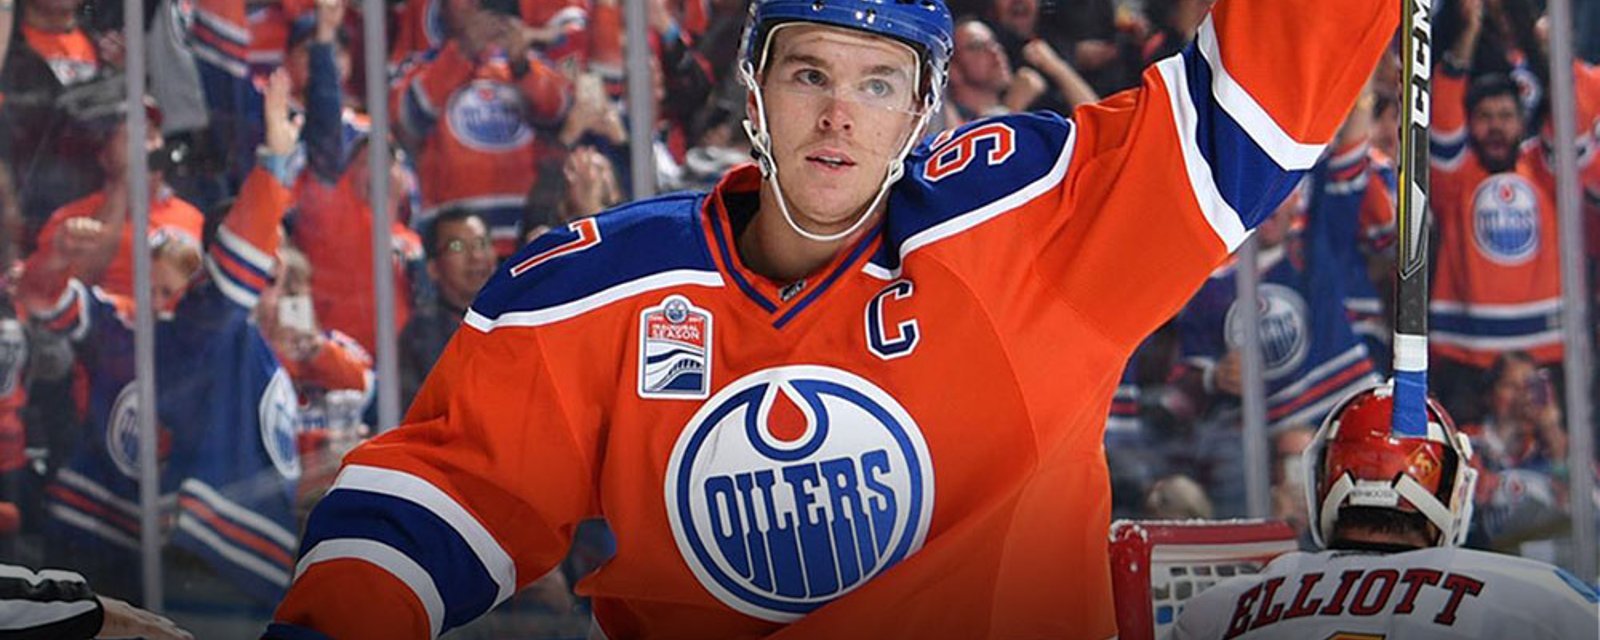 Connor McDavid’s top 10 from 2016-17